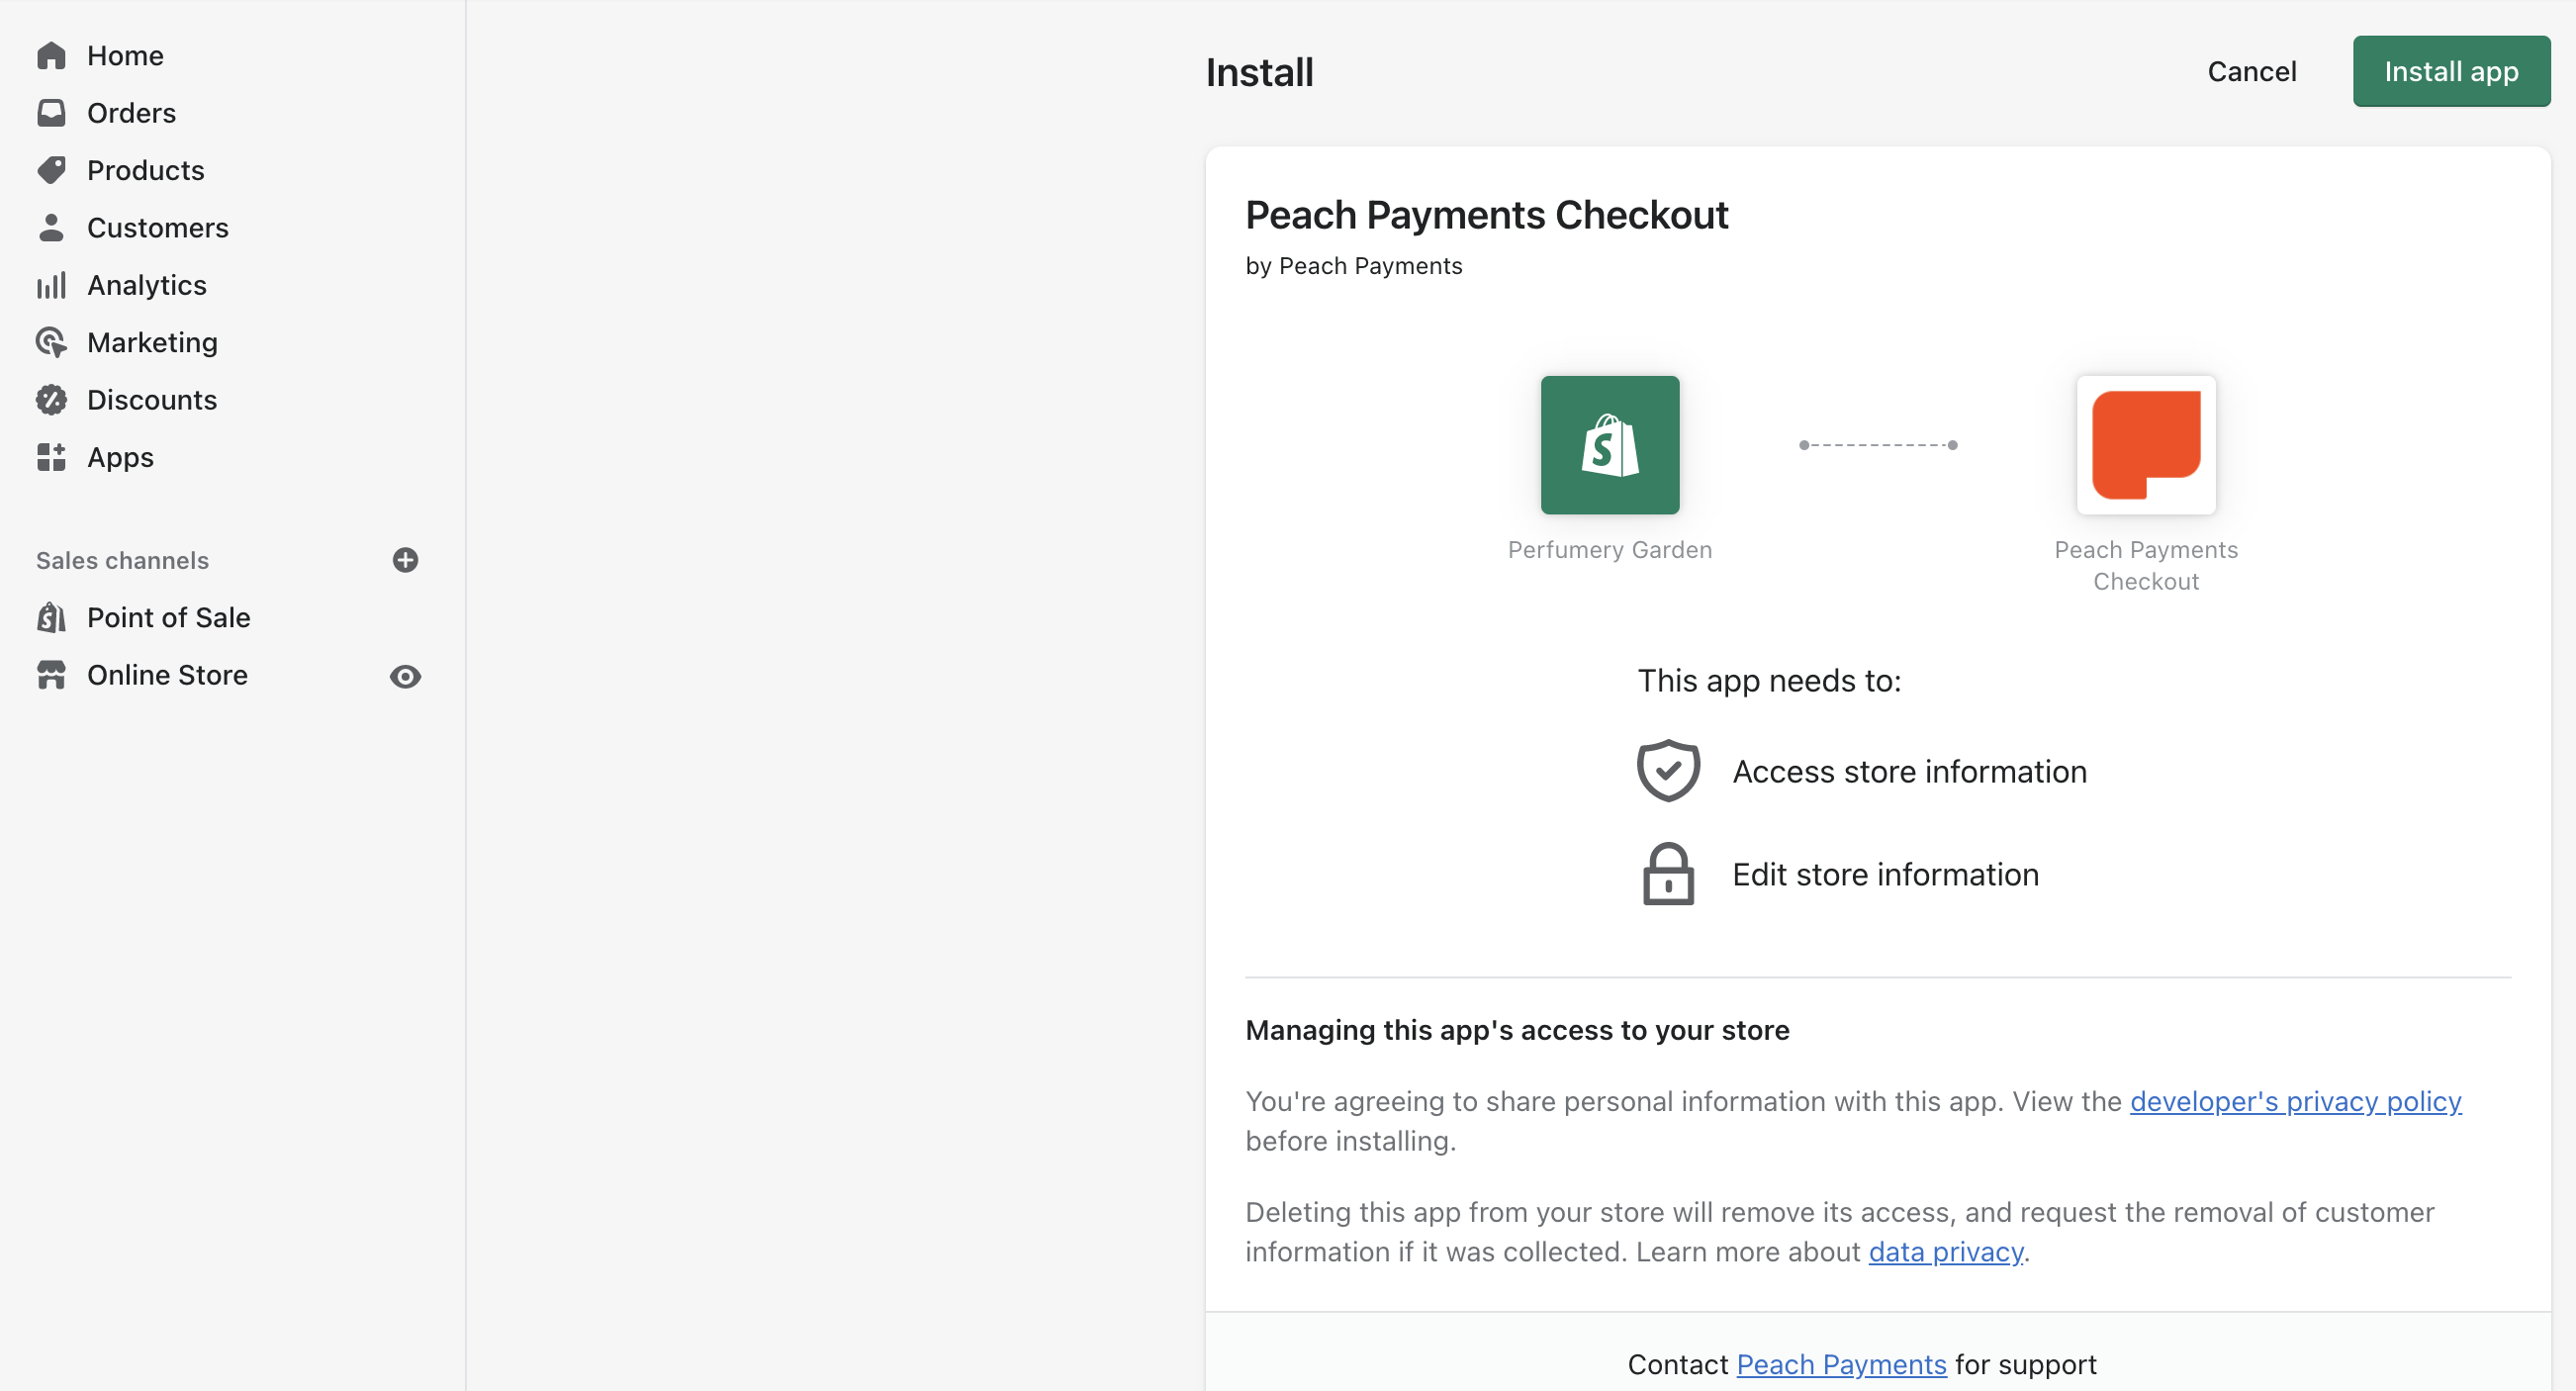 Install the Peach Payments app